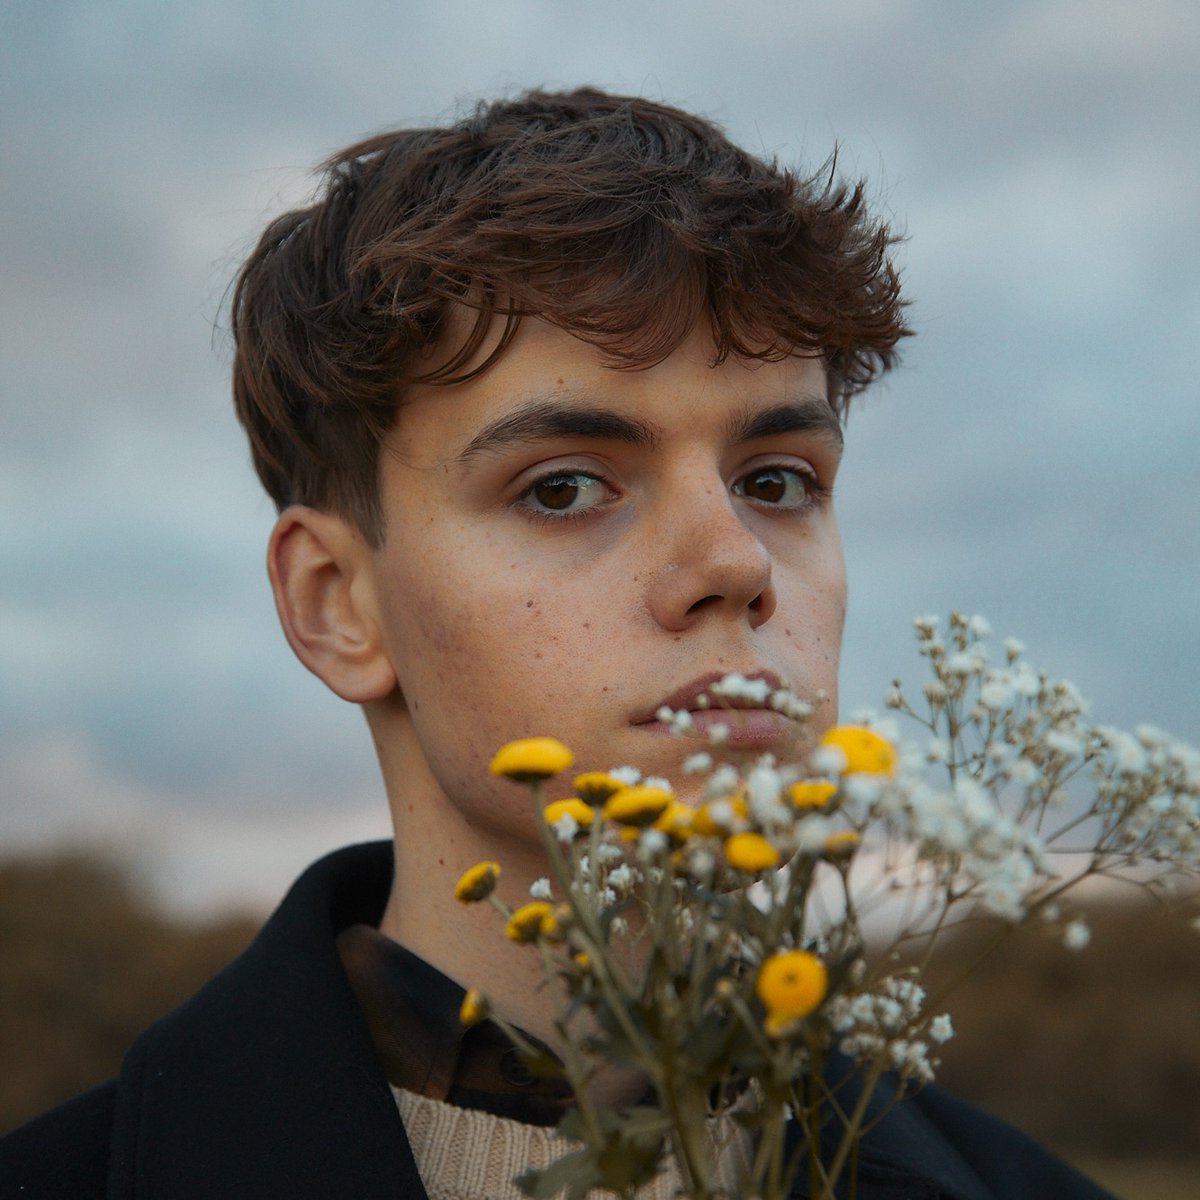 Looking forward to having rising pop-star @fredroberts55 at Omeara on 29th Nov, who's natural storytelling turns emotional wounds into anthemic pop ballads. Tickets on sale 10am Friday: omearalondon.com/event/fred-rob…